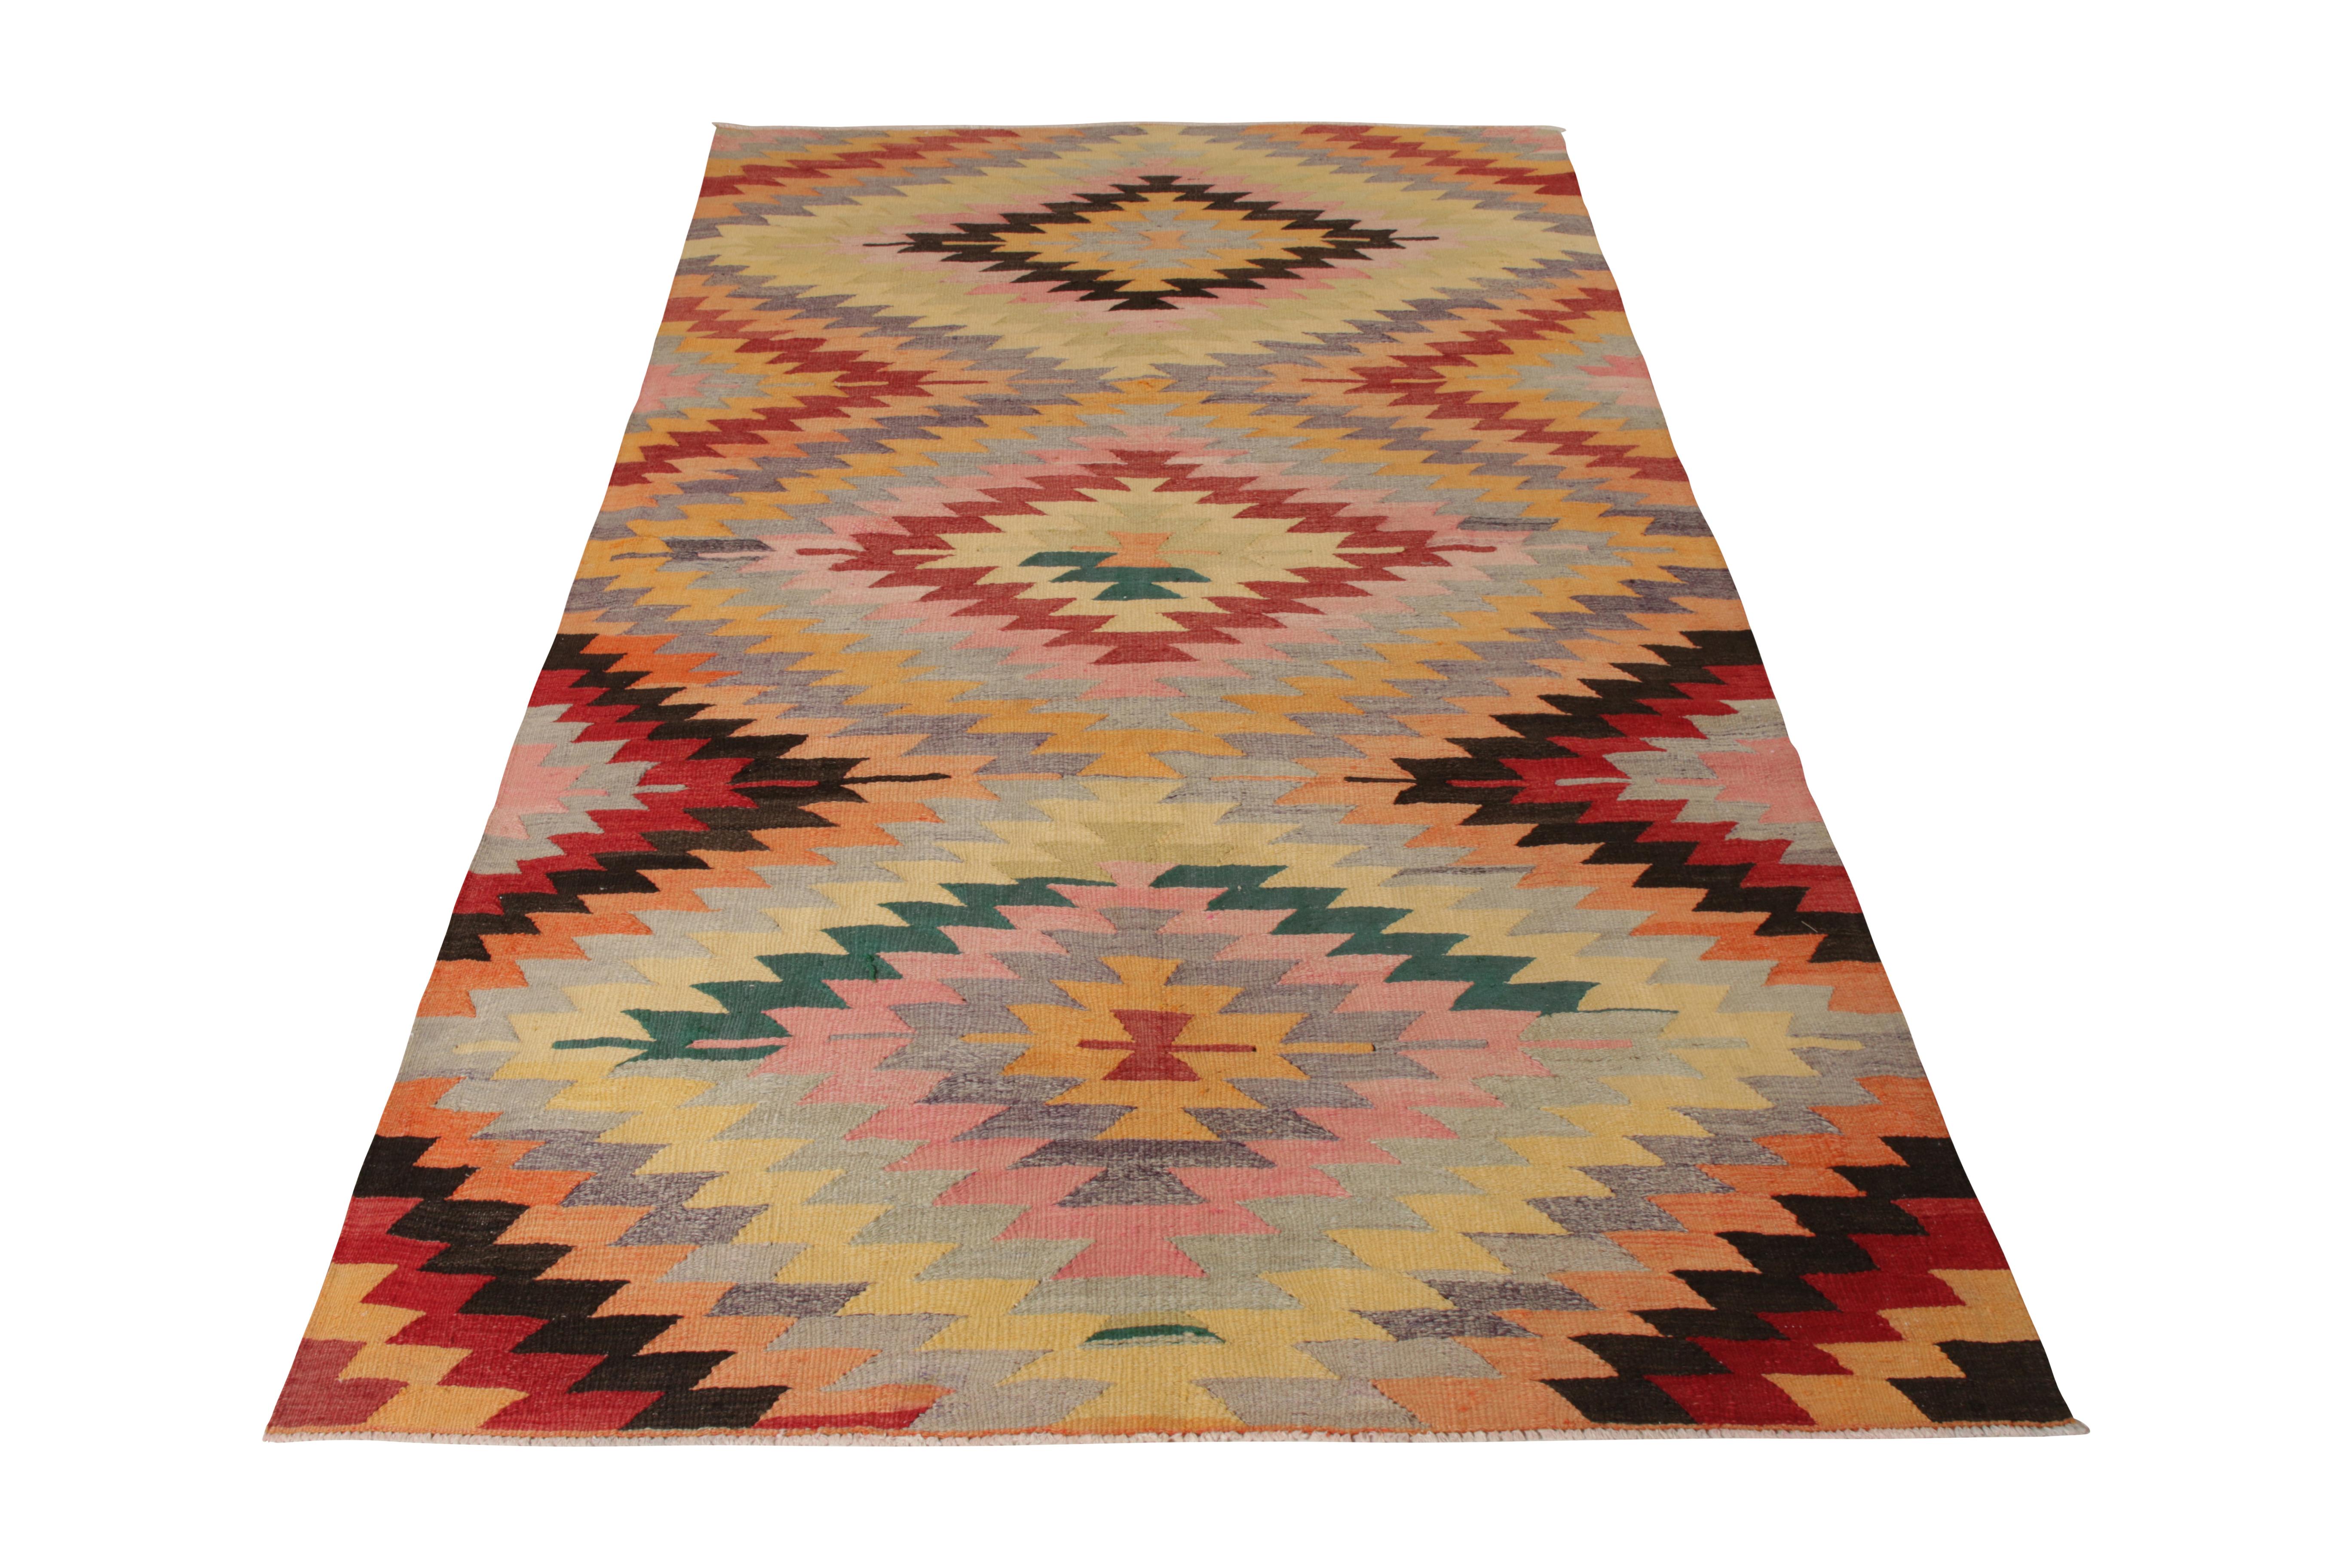 A 5 x 9 vintage Kilim rug of Afyon design lineage, handwoven in wool originating from Turkey circa 1950-1960. Enjoying vibrant, modern colorways for its age in notable red, pink, blue, and gold in this all over geometric pattern. Approachable with